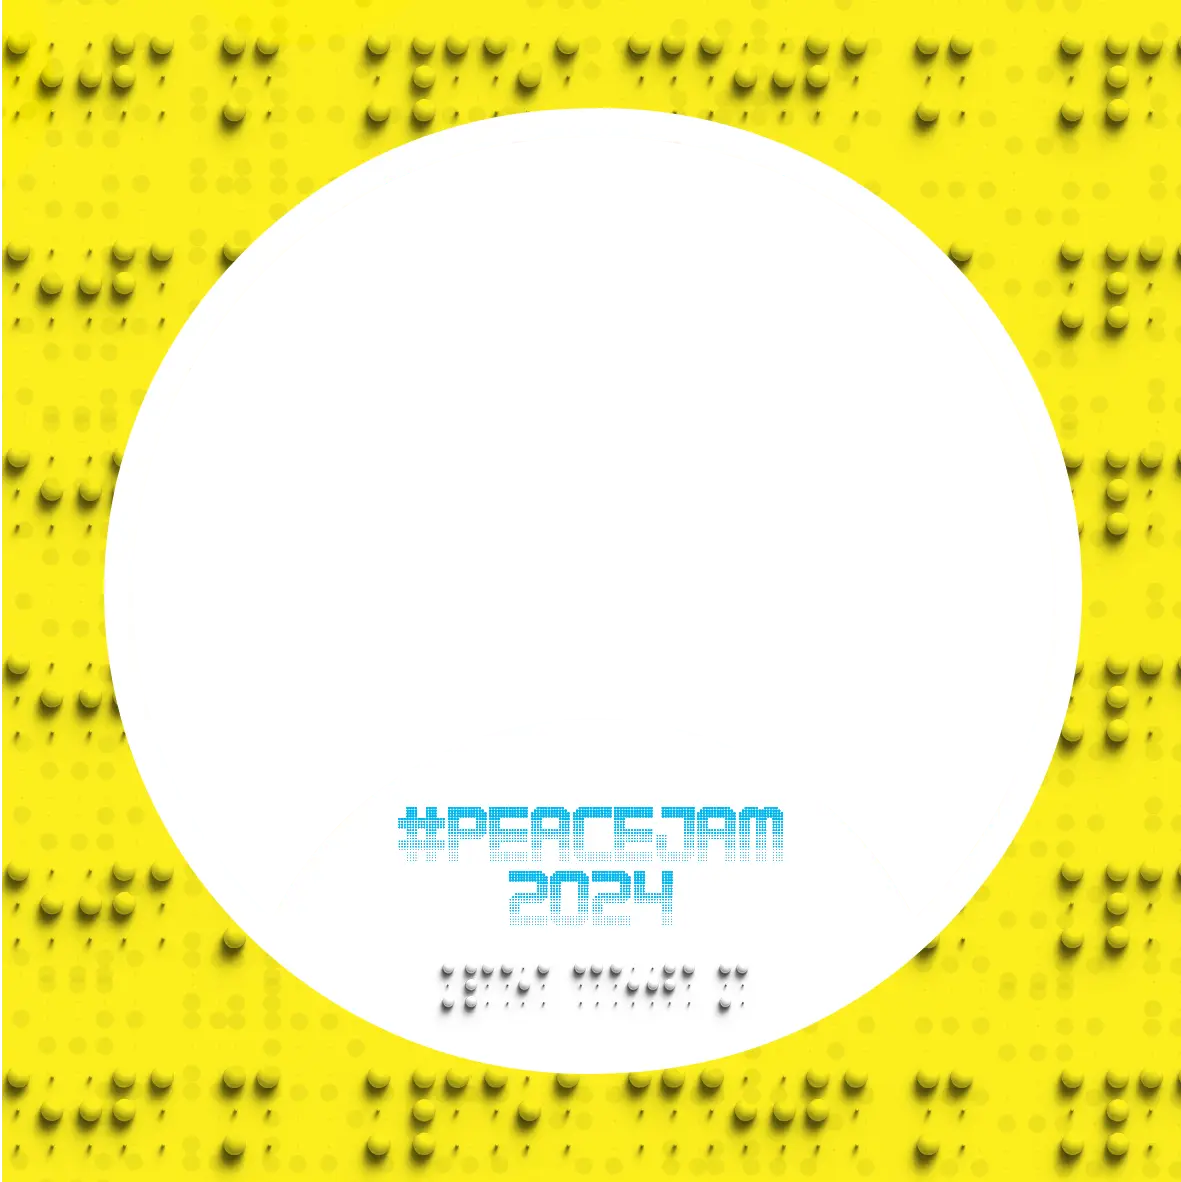 Facebook Frame for peacejam2024 , has a yellow pattern and a circular image space in the middle.